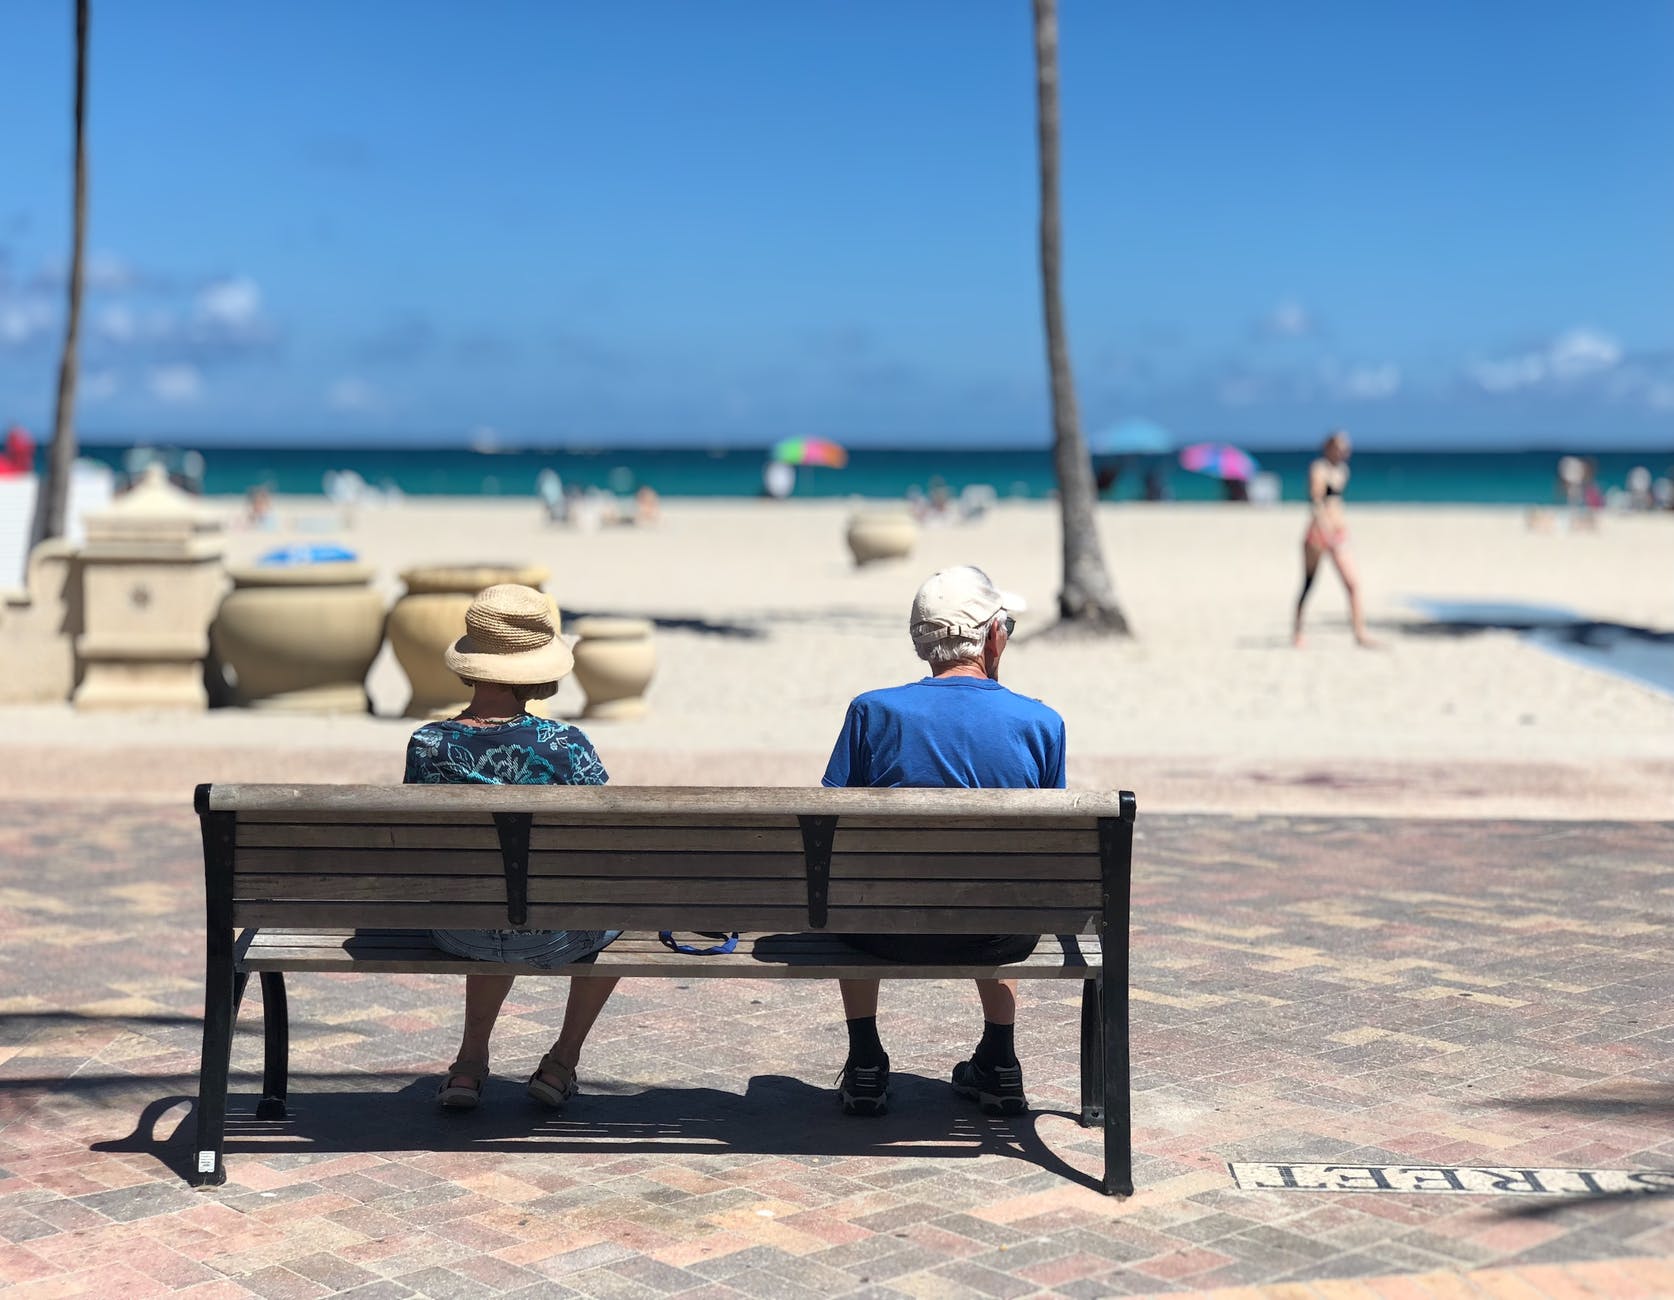 Elderly couple sitting on a bench at a beach and enjoying their time